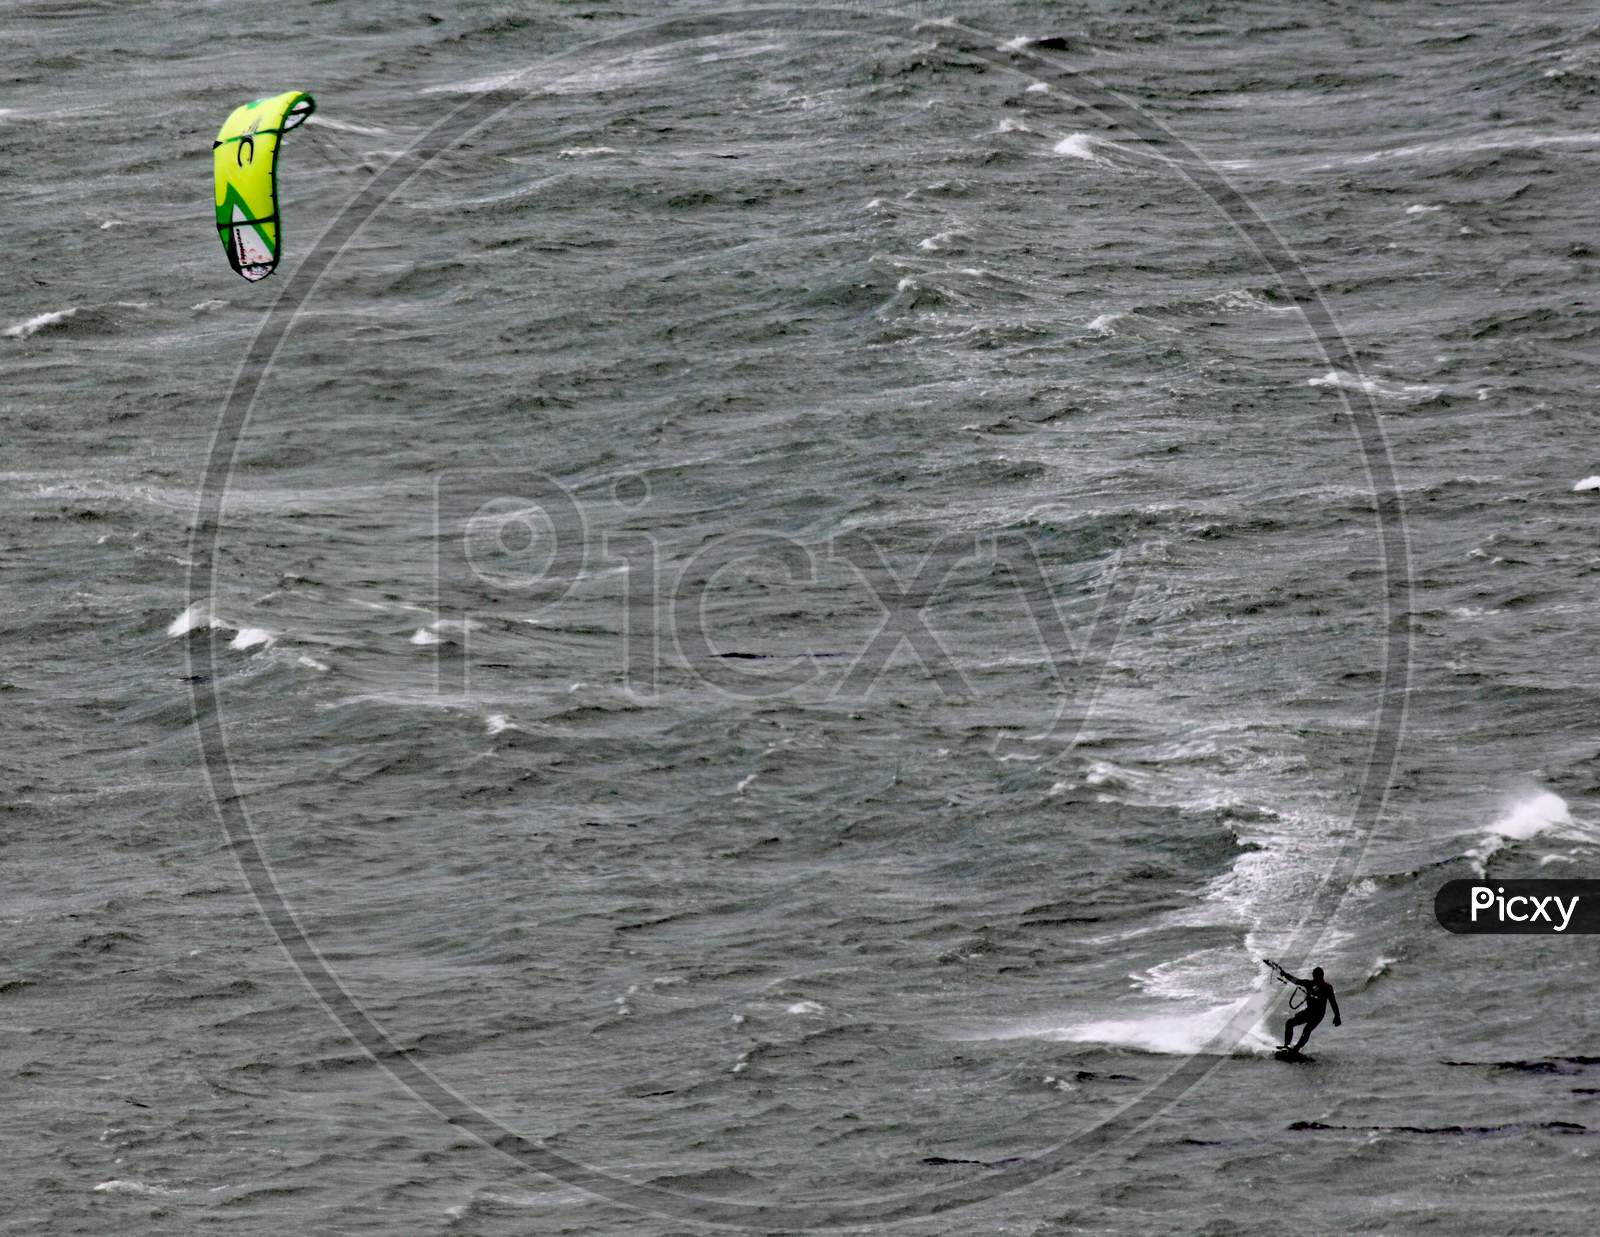 A Kite Surfer Moves Across Lyall Bay In Wellington New Zealand On A Grey Stormy Day